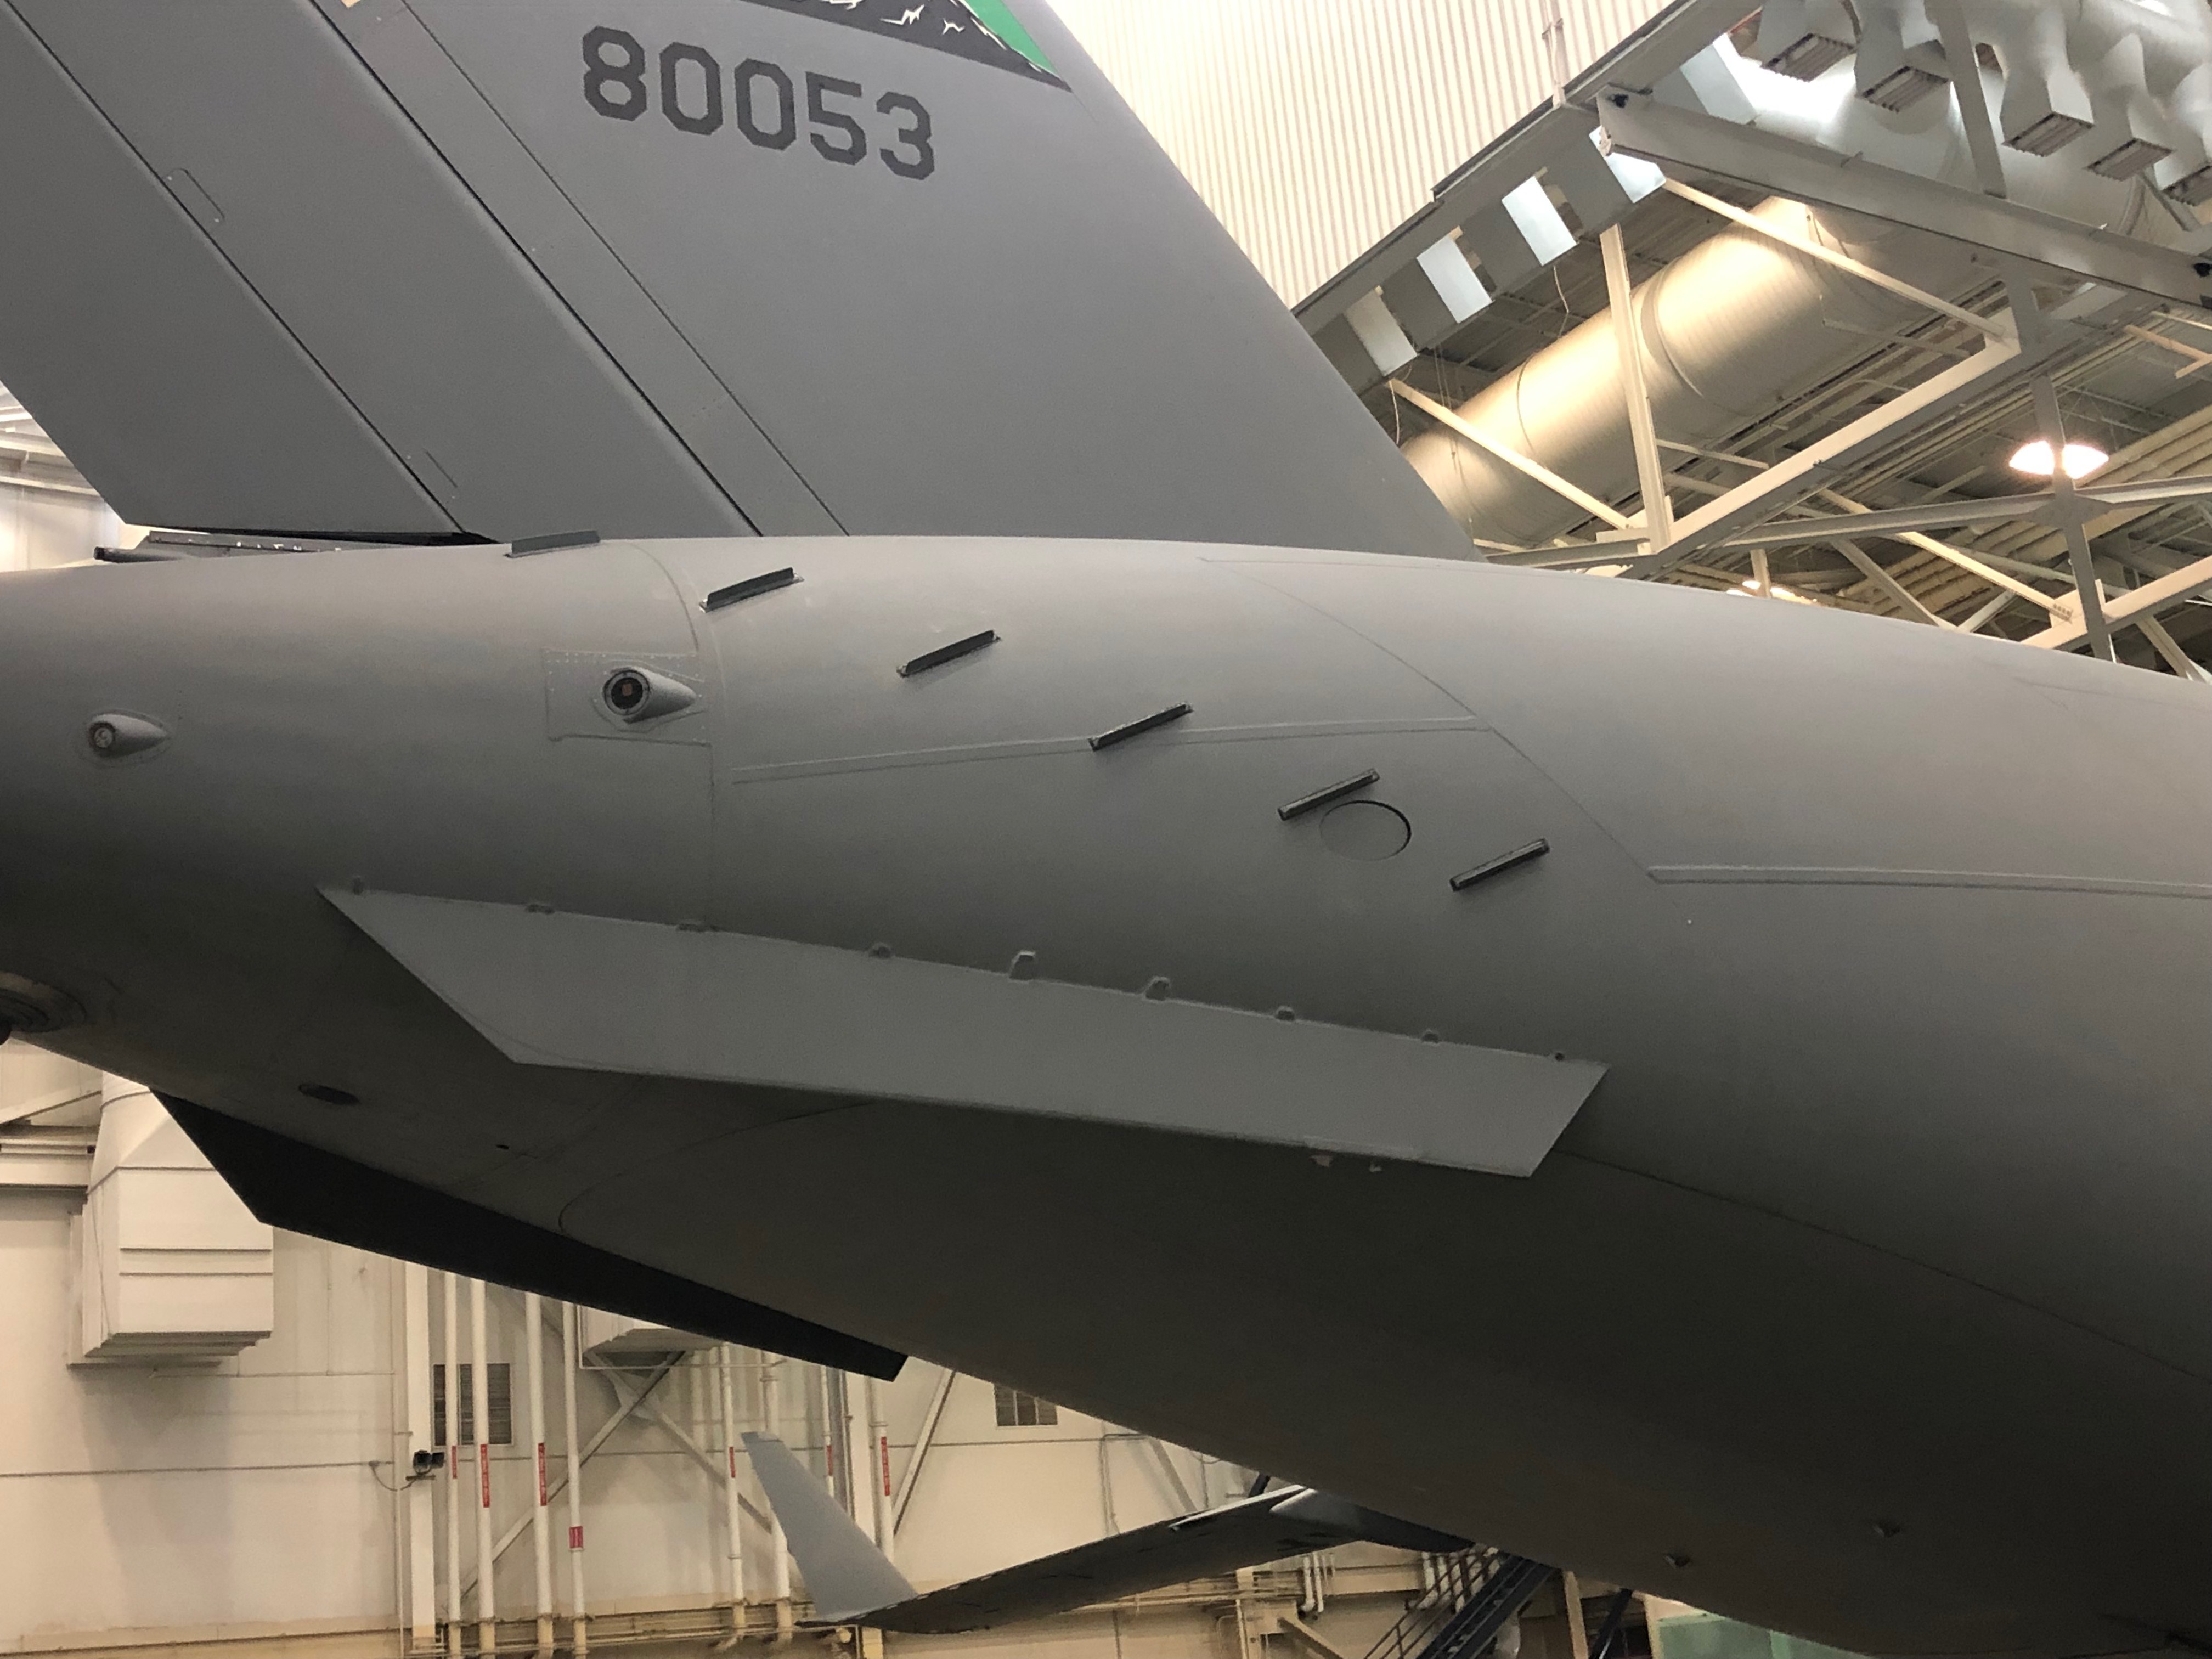 Why  U.S.  Air Force  is  Investing  on  these  3D Printed  Microvanes  for  Its  C-17  Globemaster III  Aircraft  ?